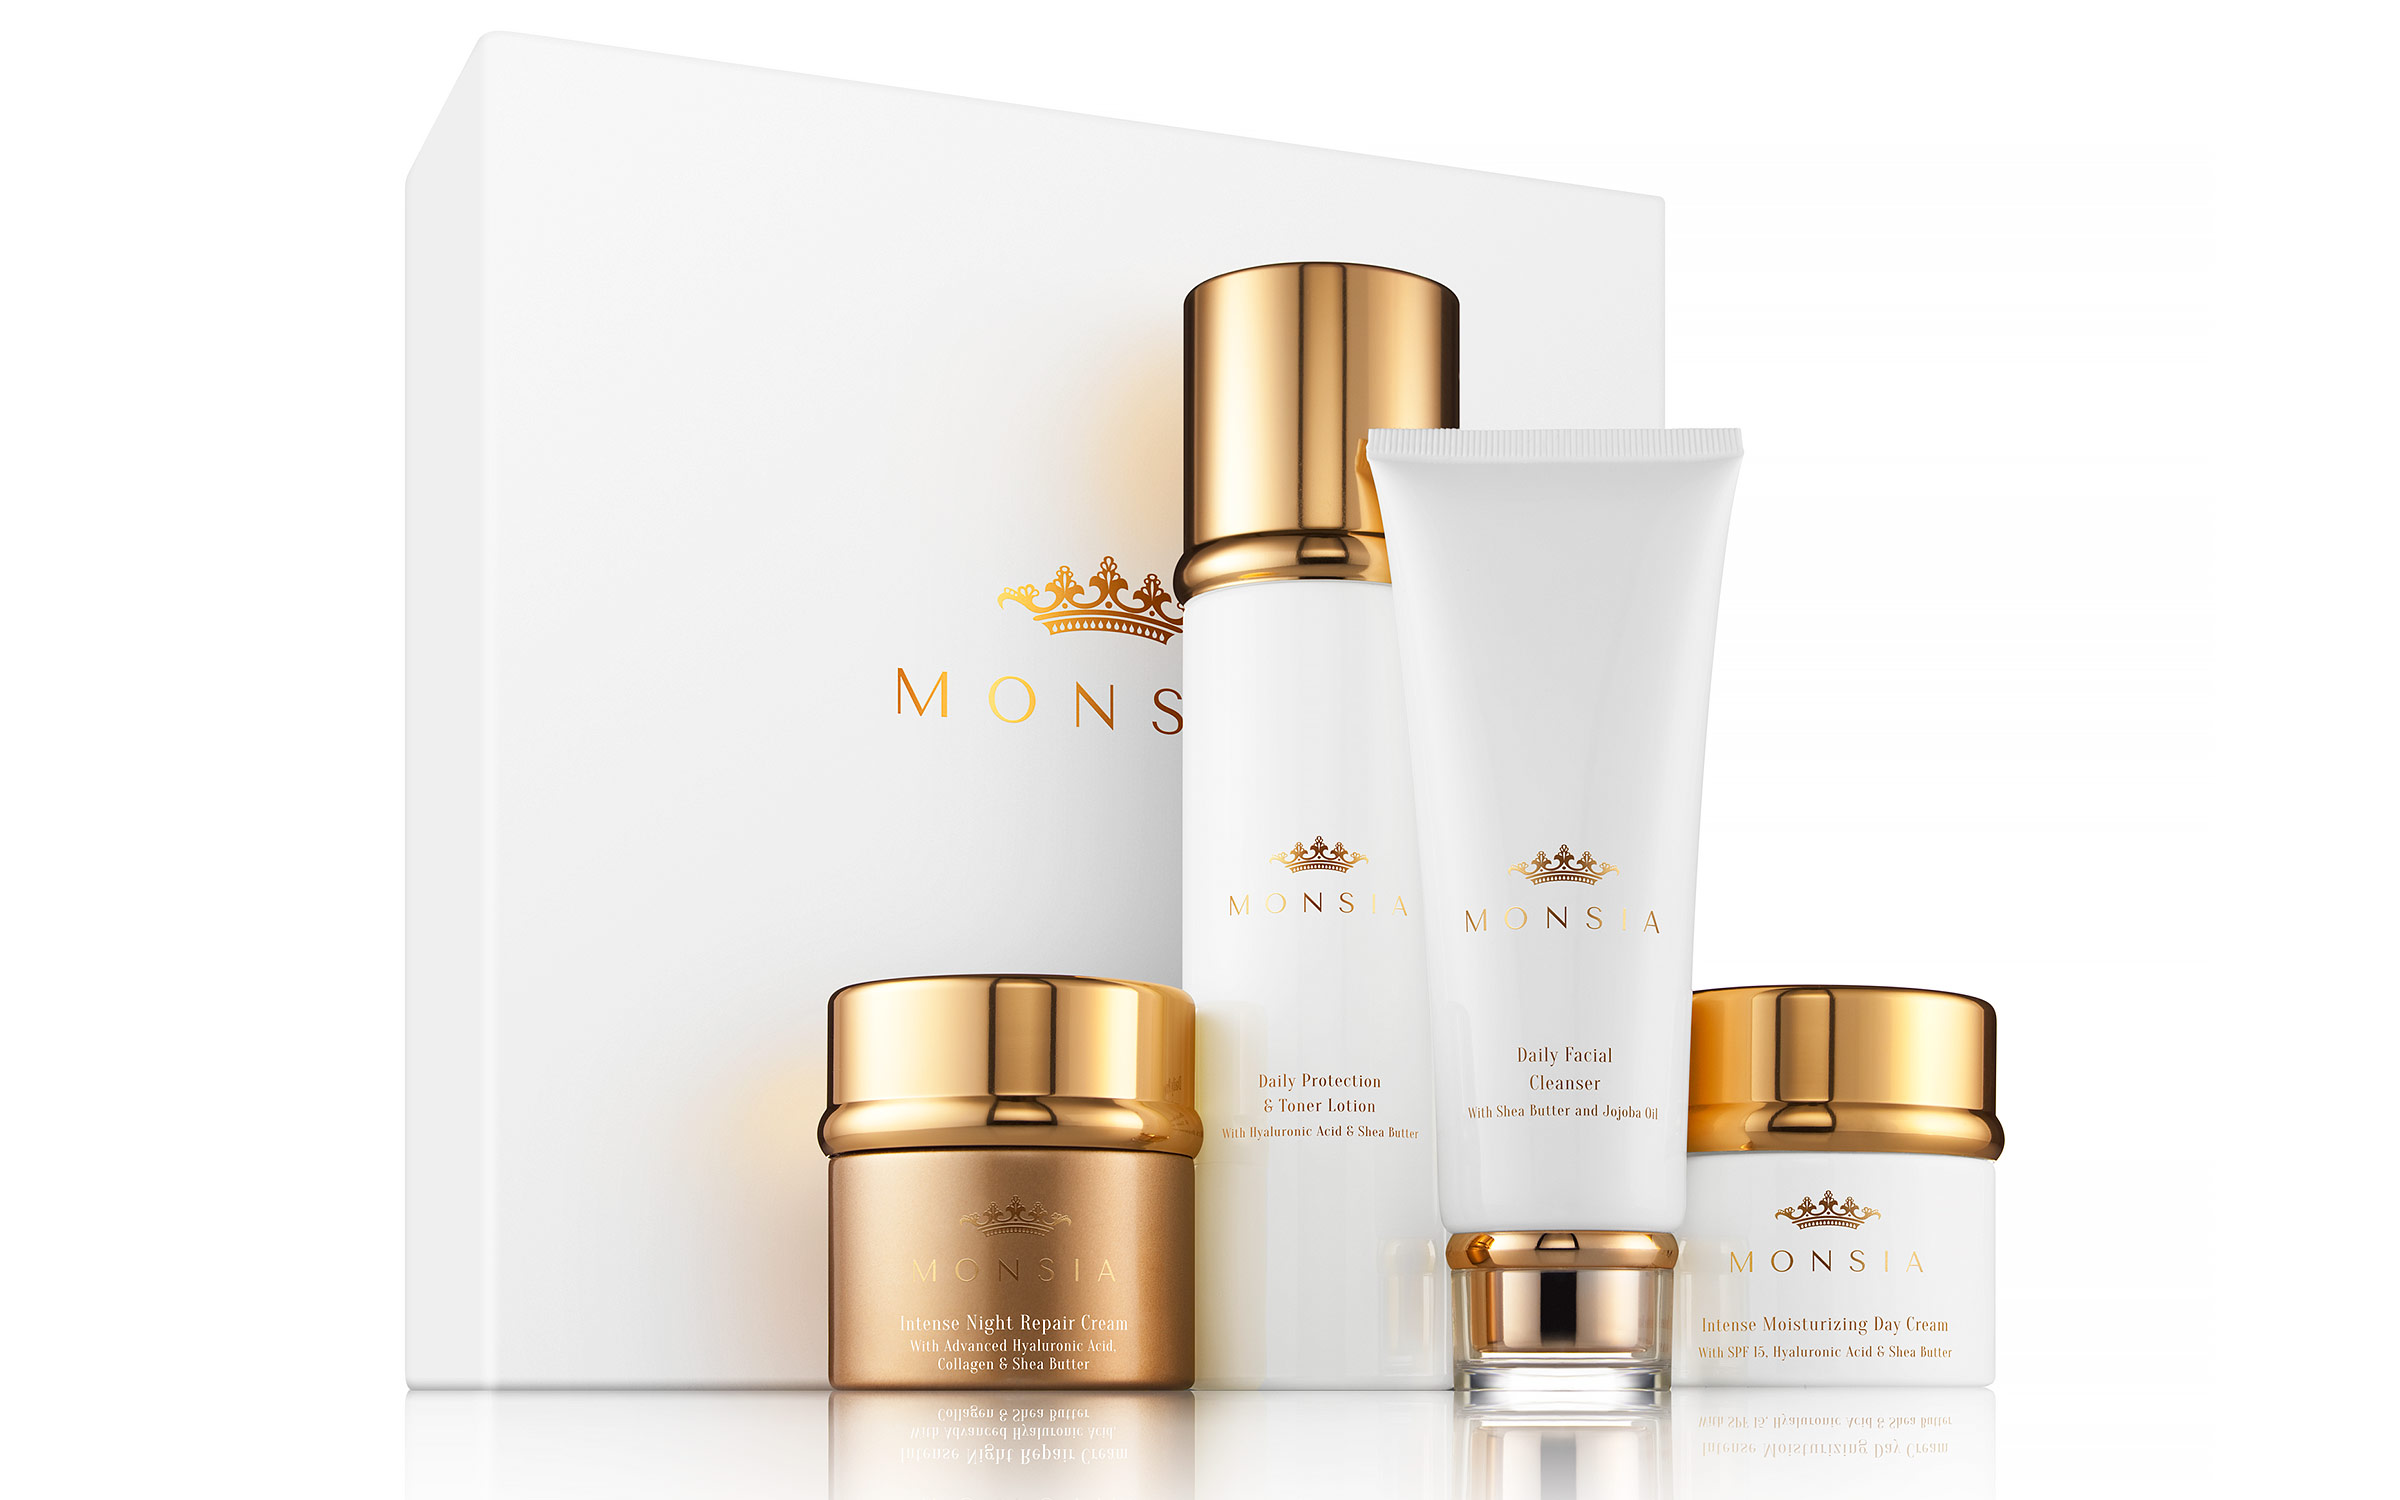 Cosmetics and skin care product photography for luxury skin care brand Monsia, shot by Zachary Goulko at his product photography studio located in the New York City area.